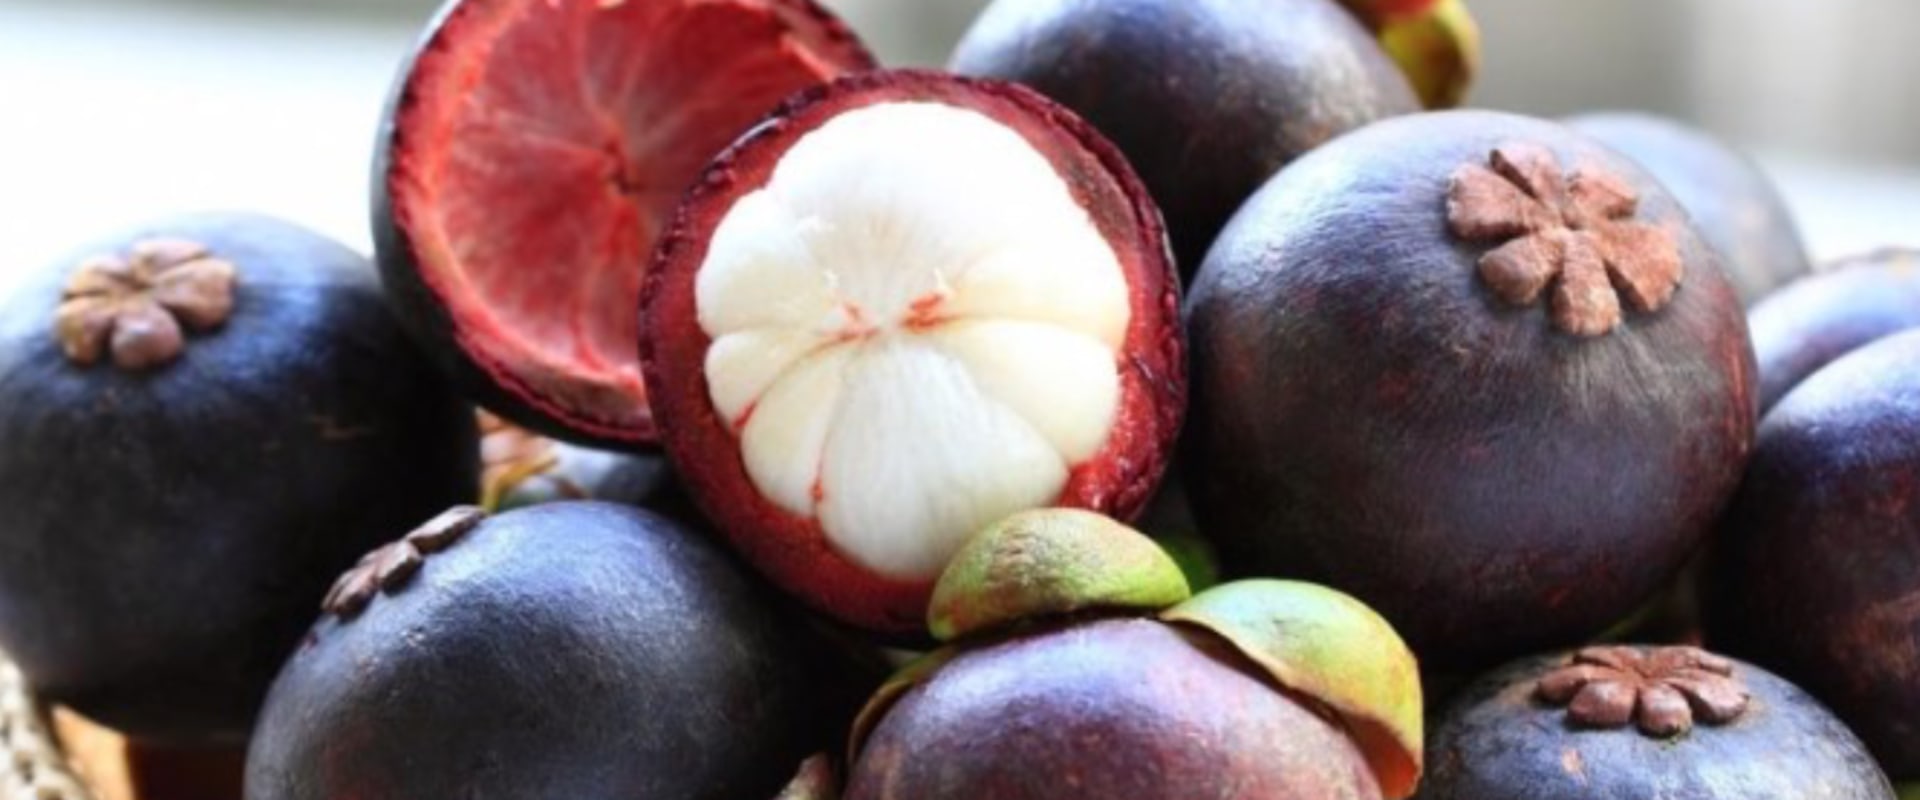 Where is mangosteen illegal?